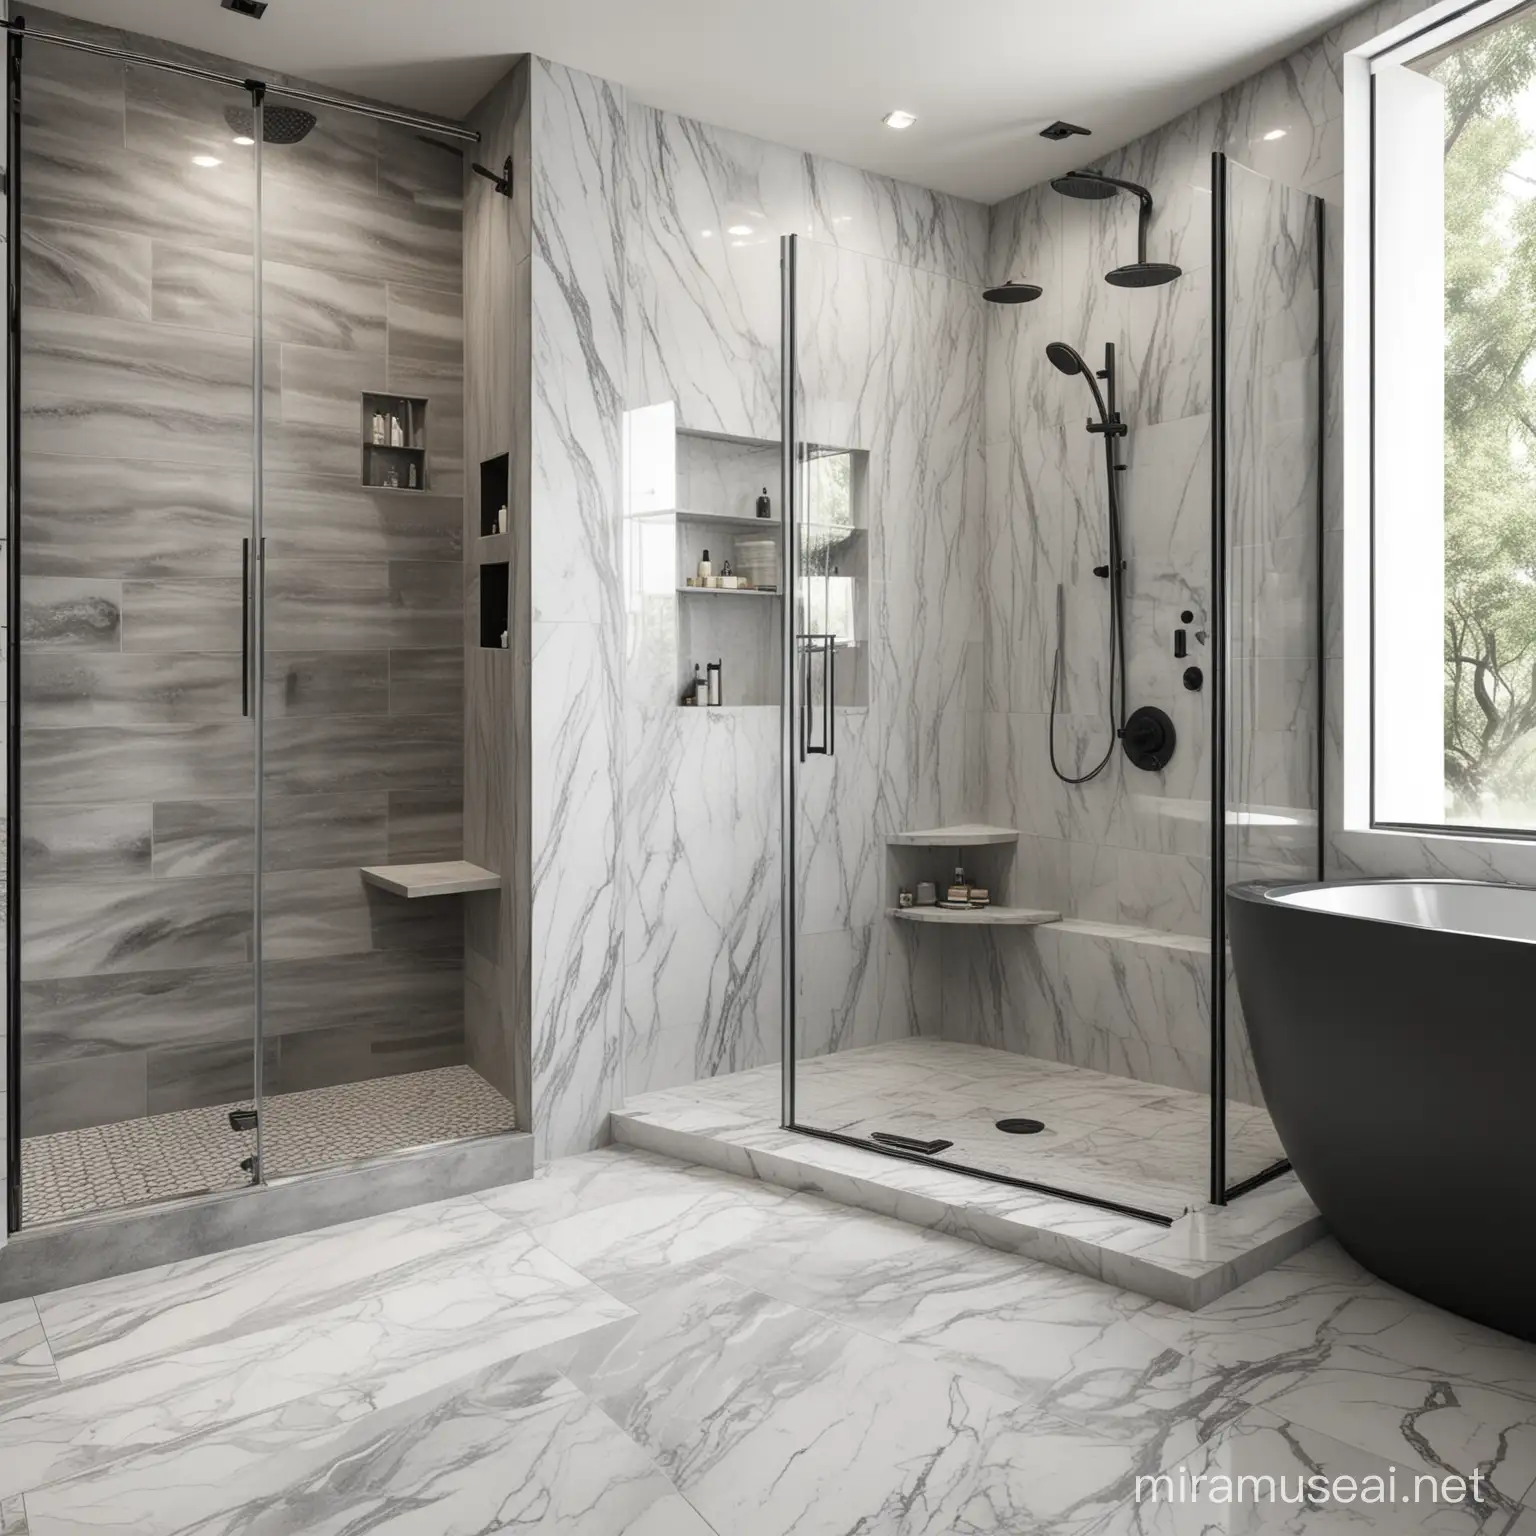 realistic modern bathroom with shower wall panels that look like white marble with gray stains and dark gray etches. flooring made from tile that does not match walls. white bath tub and stainless steel appliances. 